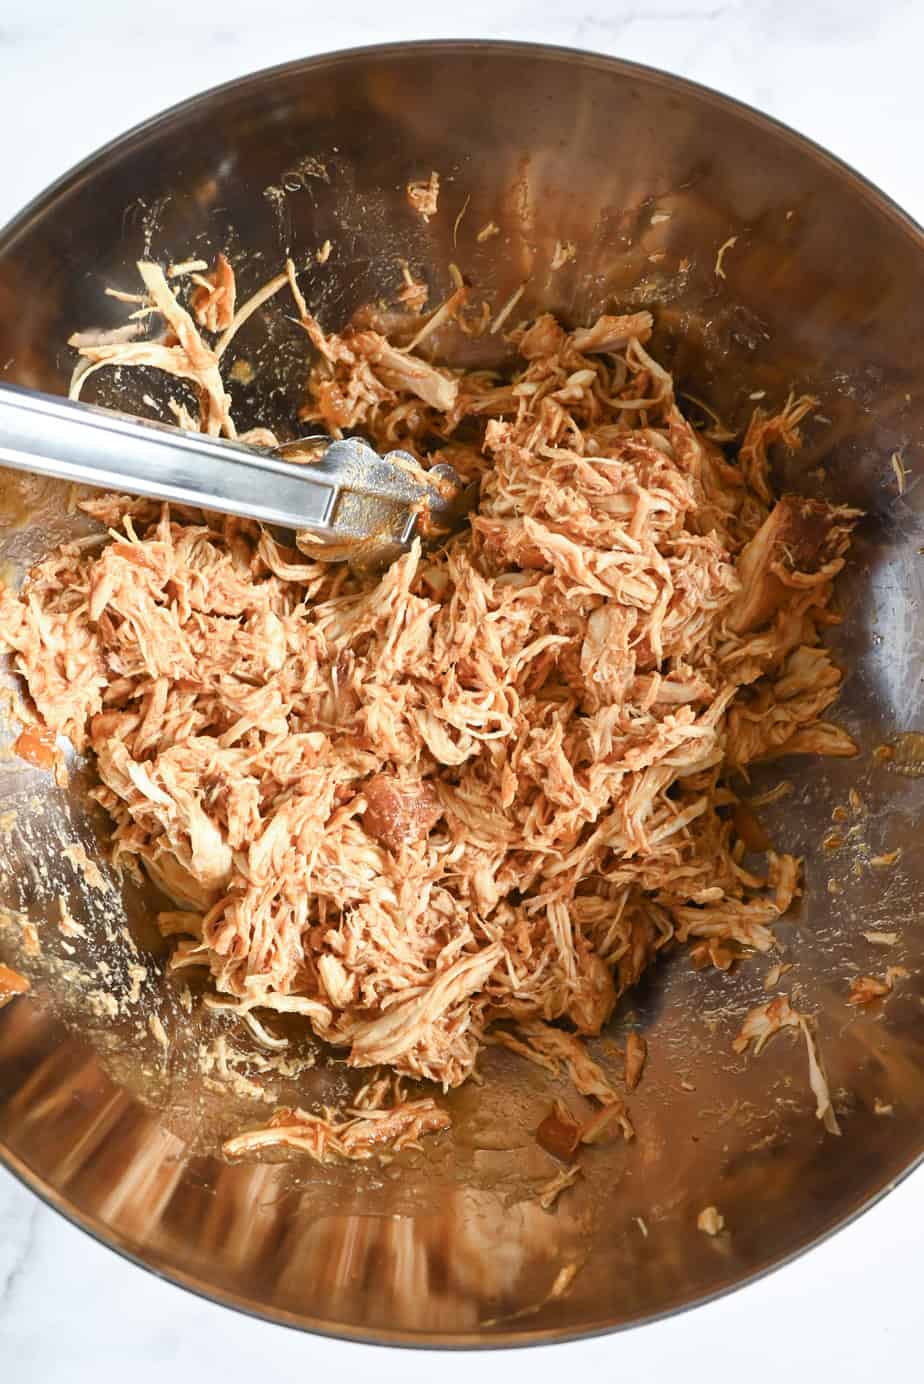 Shredded chicken mixed with barbecue sauce in a metal mixing bowl.